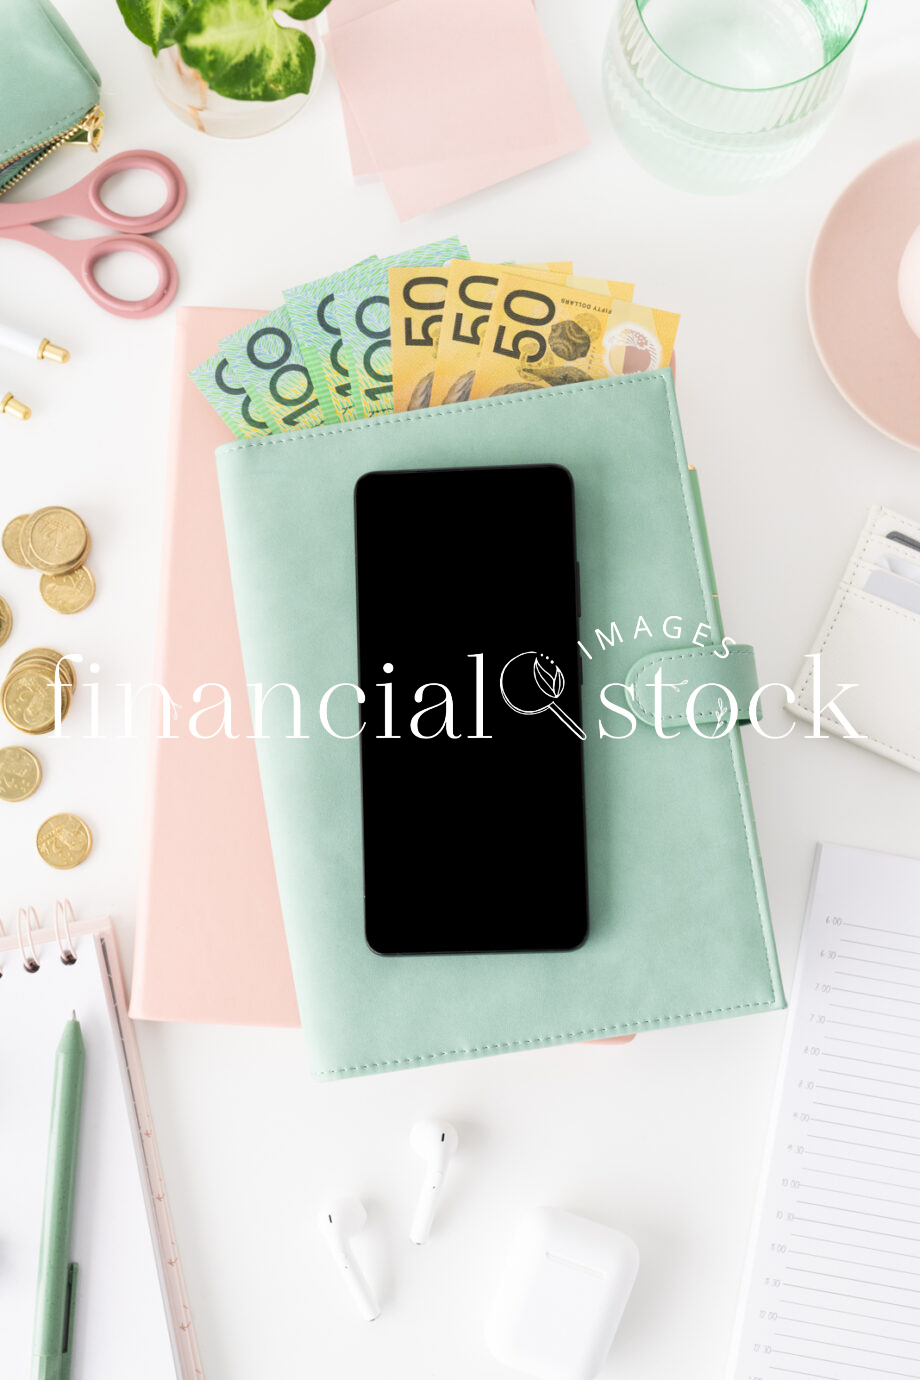 Financial Stock Images-Flatlay-Currency-coins-desktop.